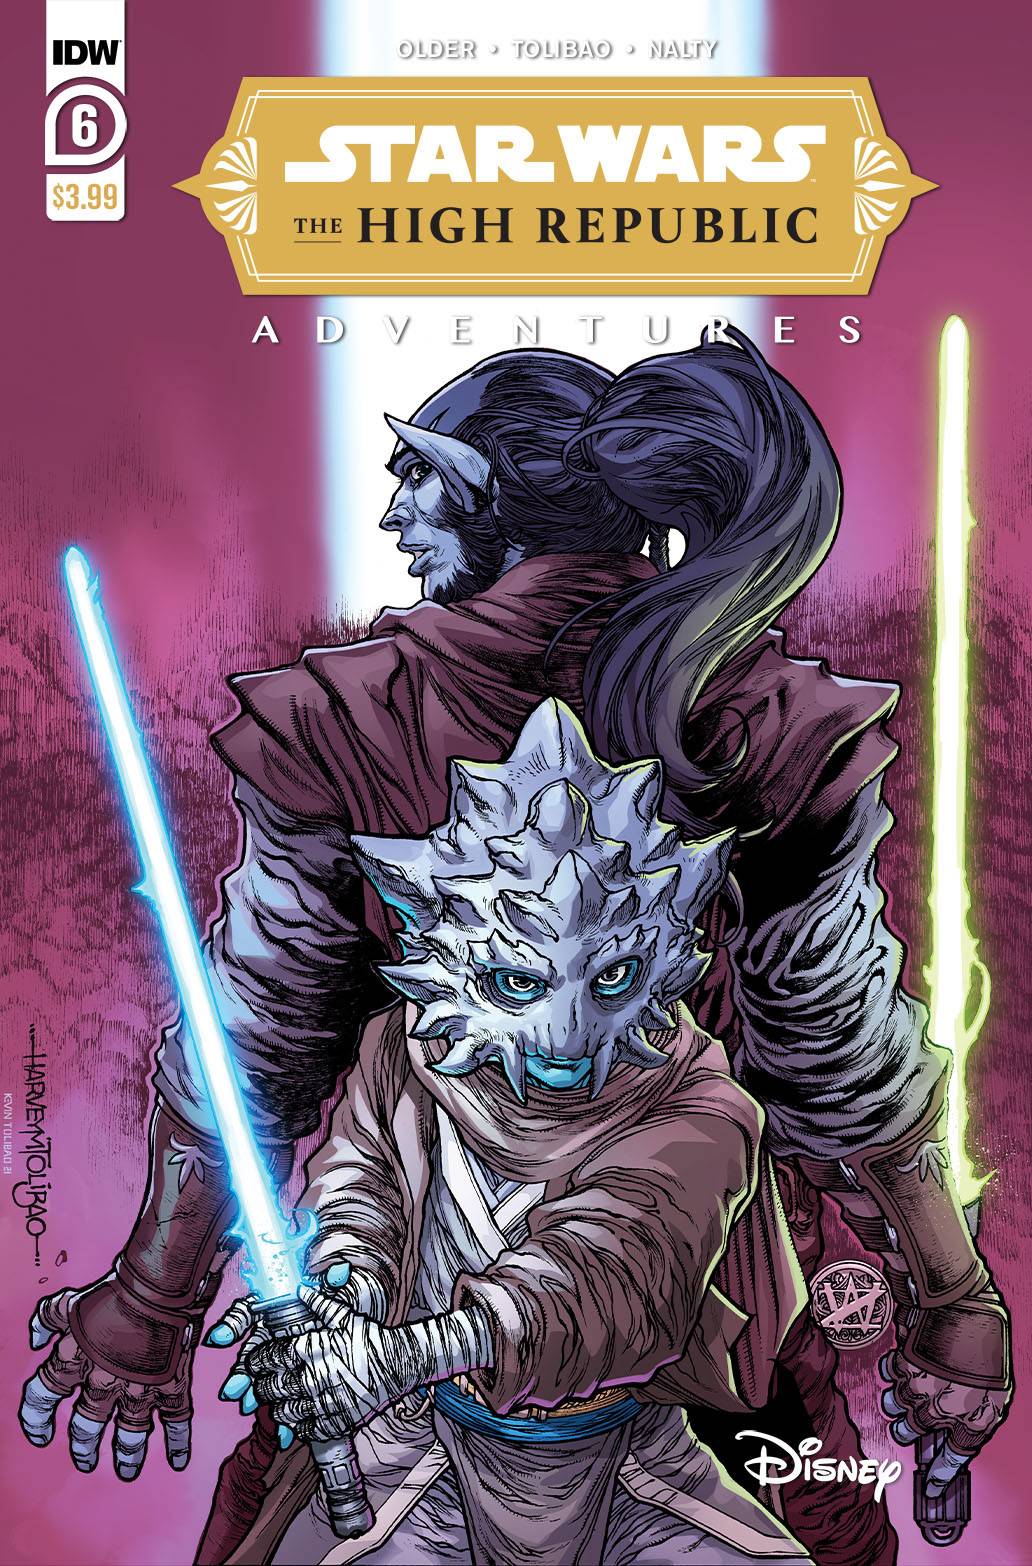 Star Wars the High Republic Adventures #6 Cover A Tolibao